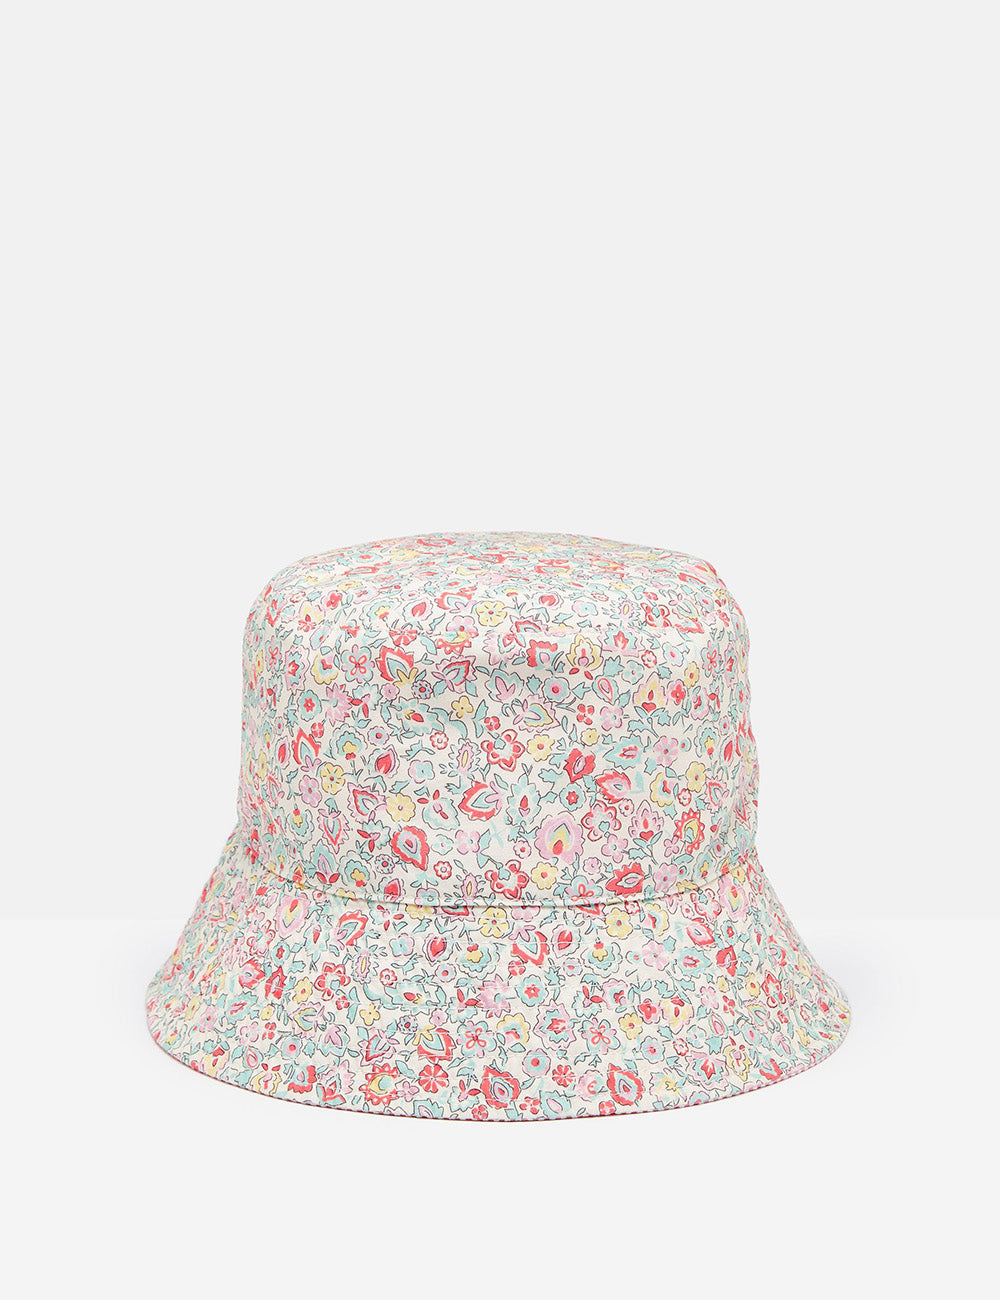 Joules Bayley Bucket Hat - White